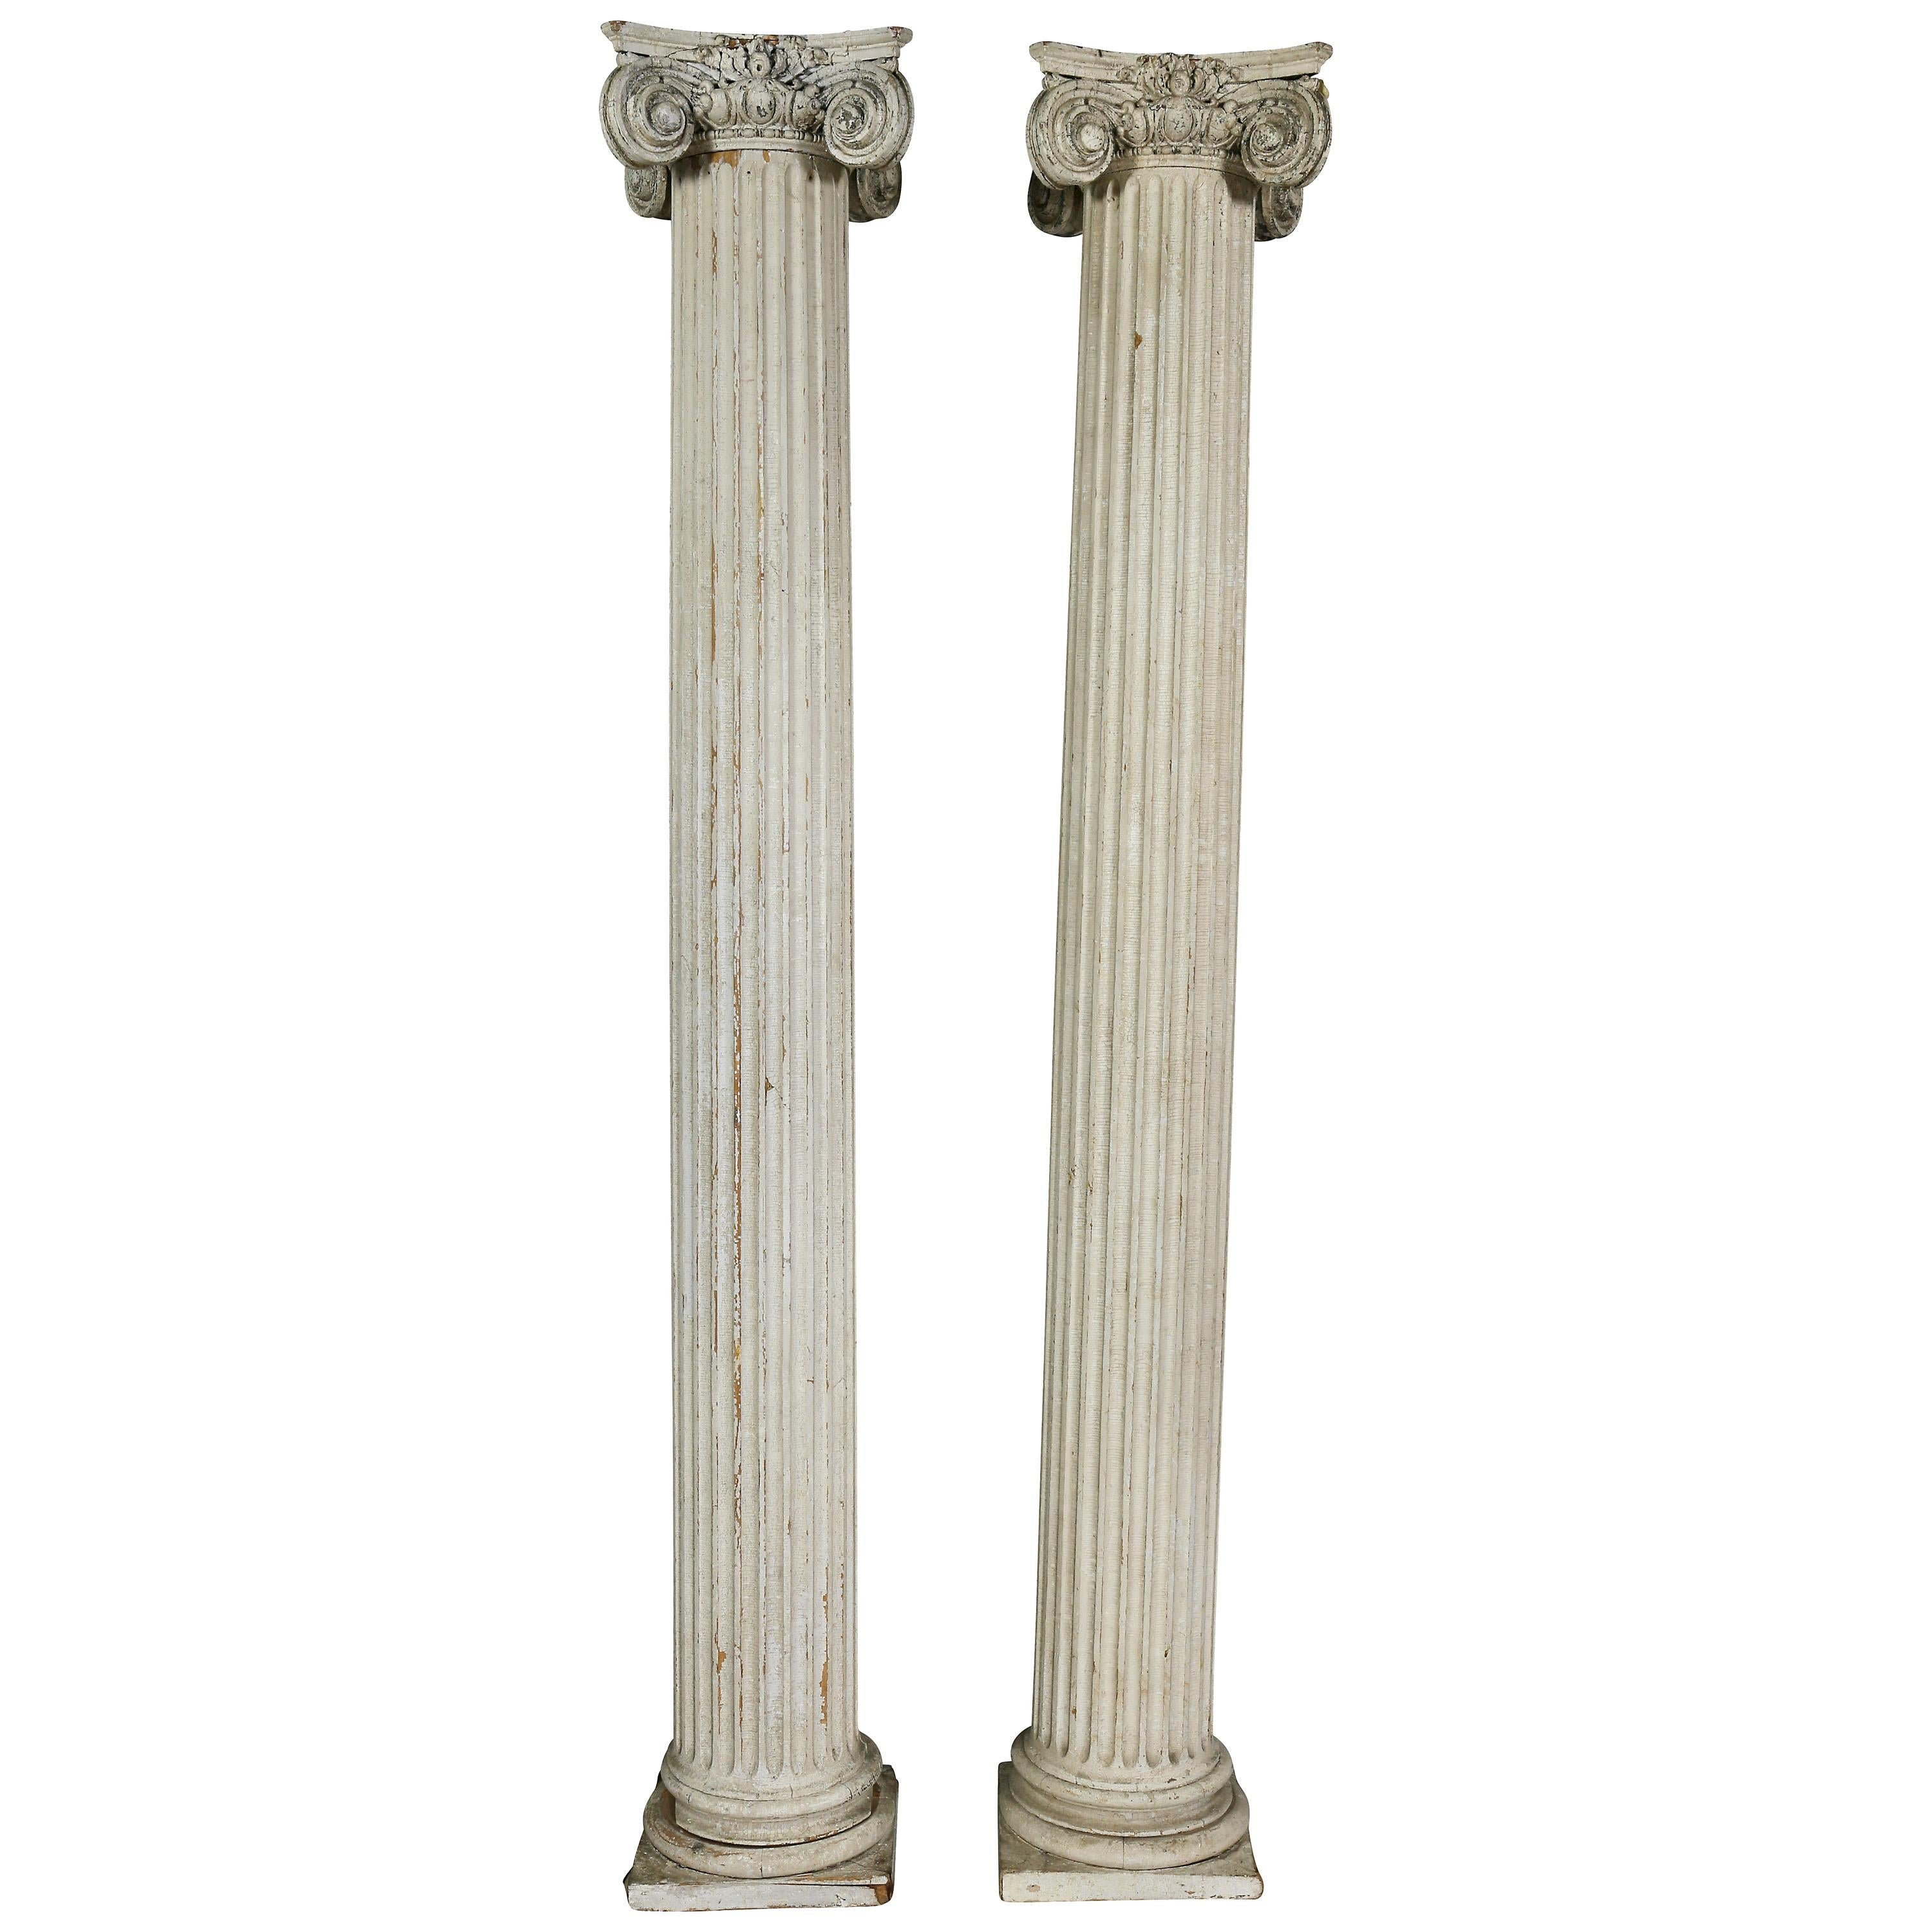 Pair of American Classical Carved Wood Ionic Columns